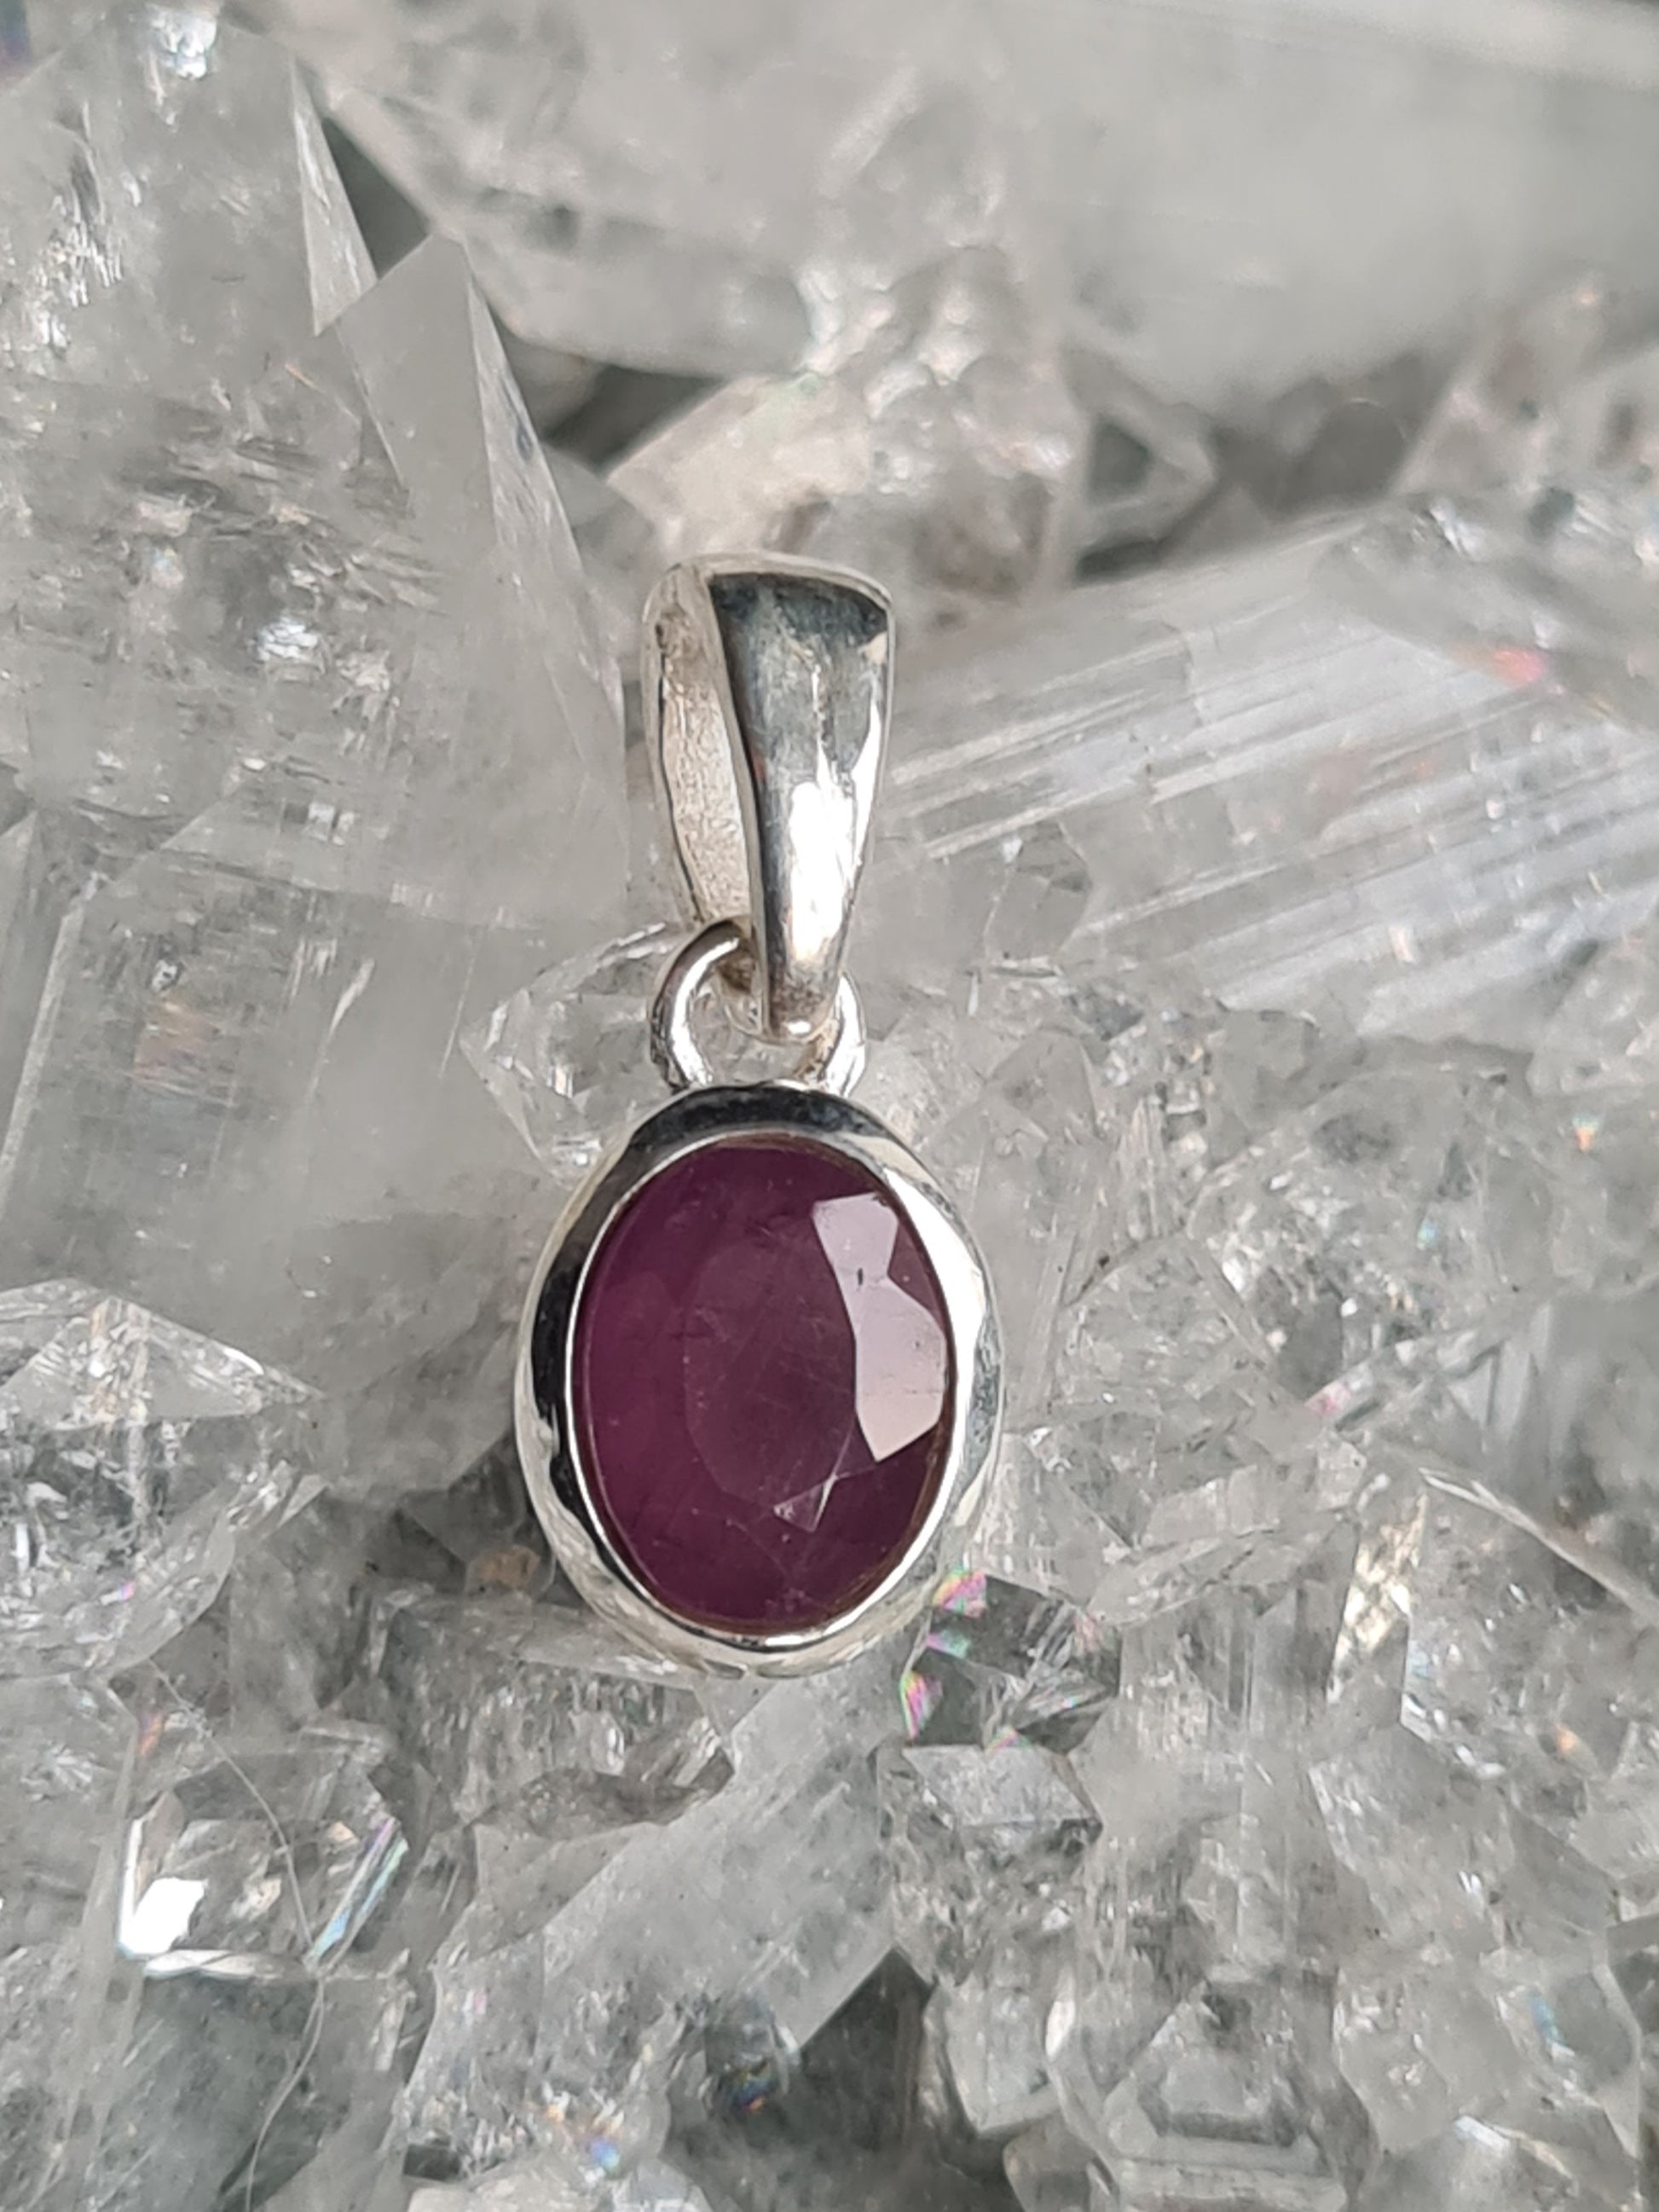 A natural ruby pendant in sterling silver. Oval shaped pinkish-red ruby from India.